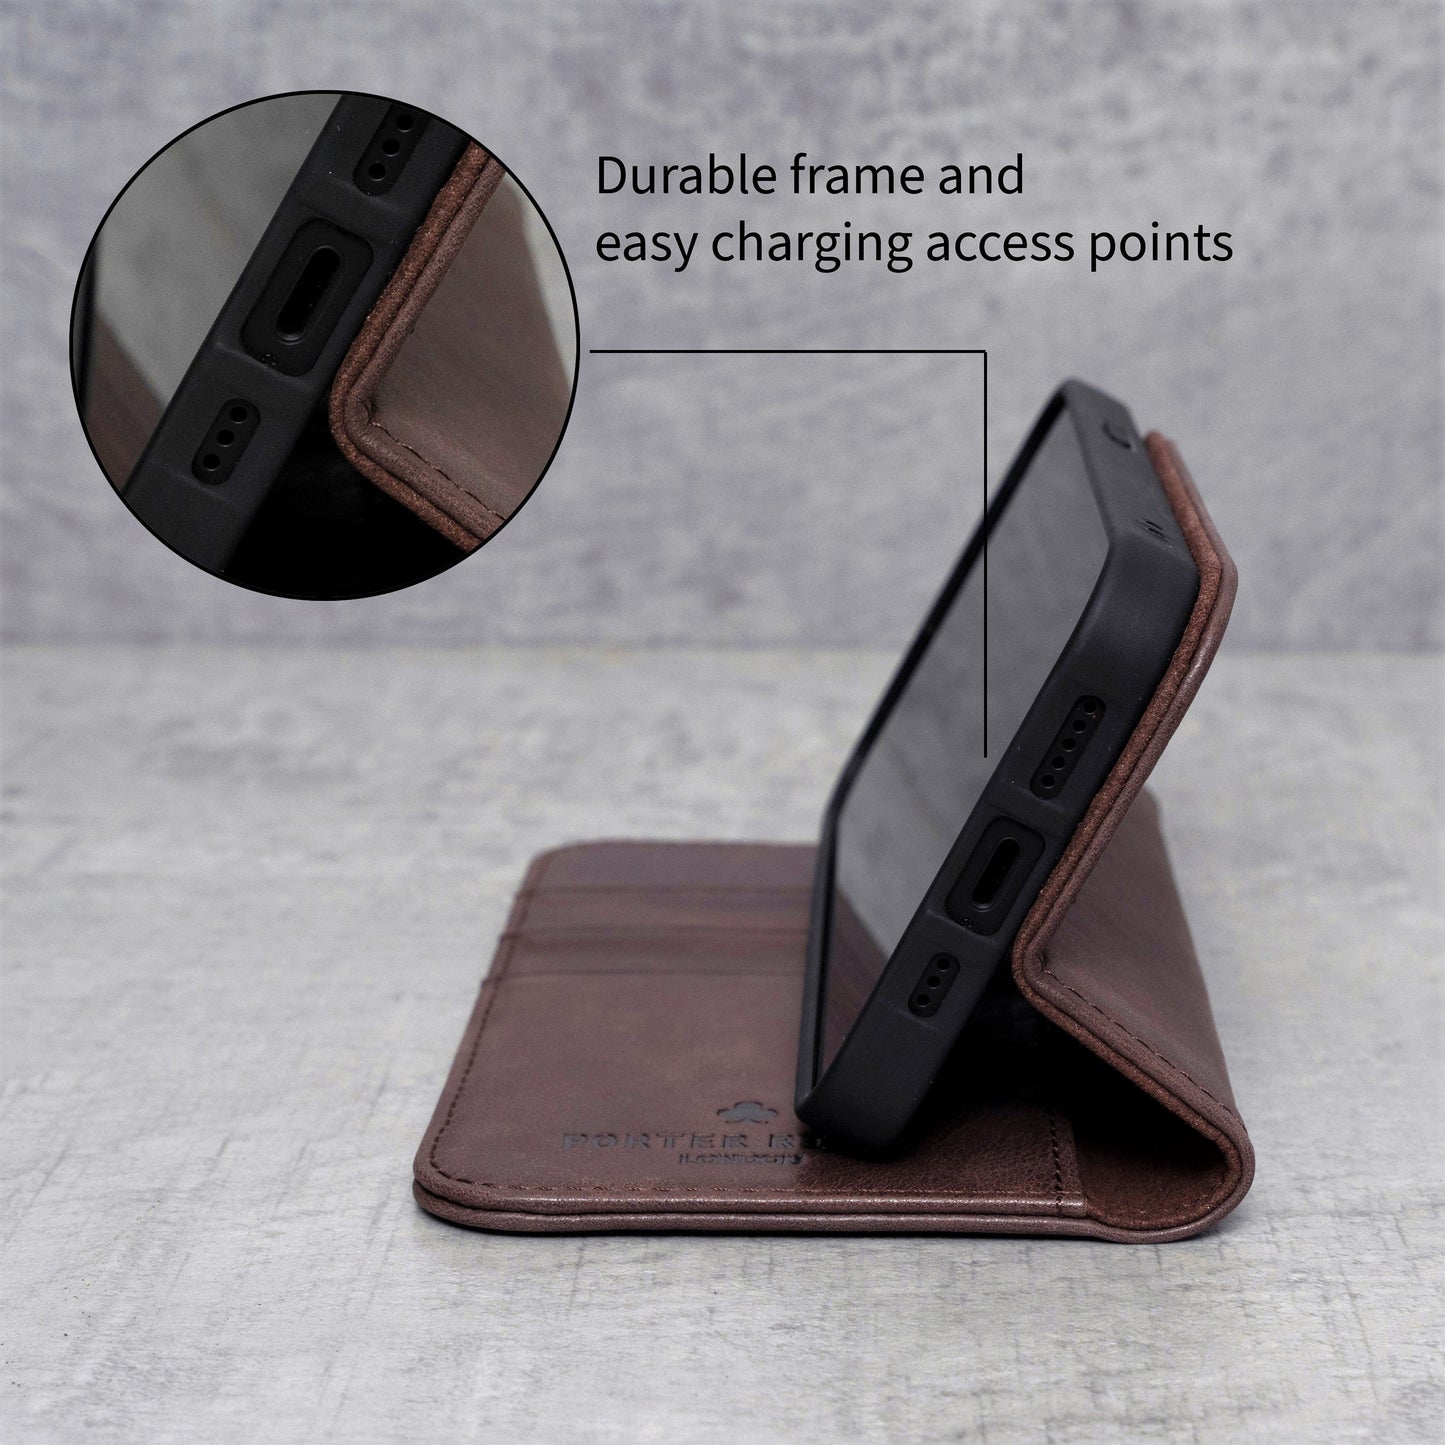 HTC U11 Leather Case. Premium Slim Genuine Leather Stand Case/Cover/Wallet (Chocolate Brown)